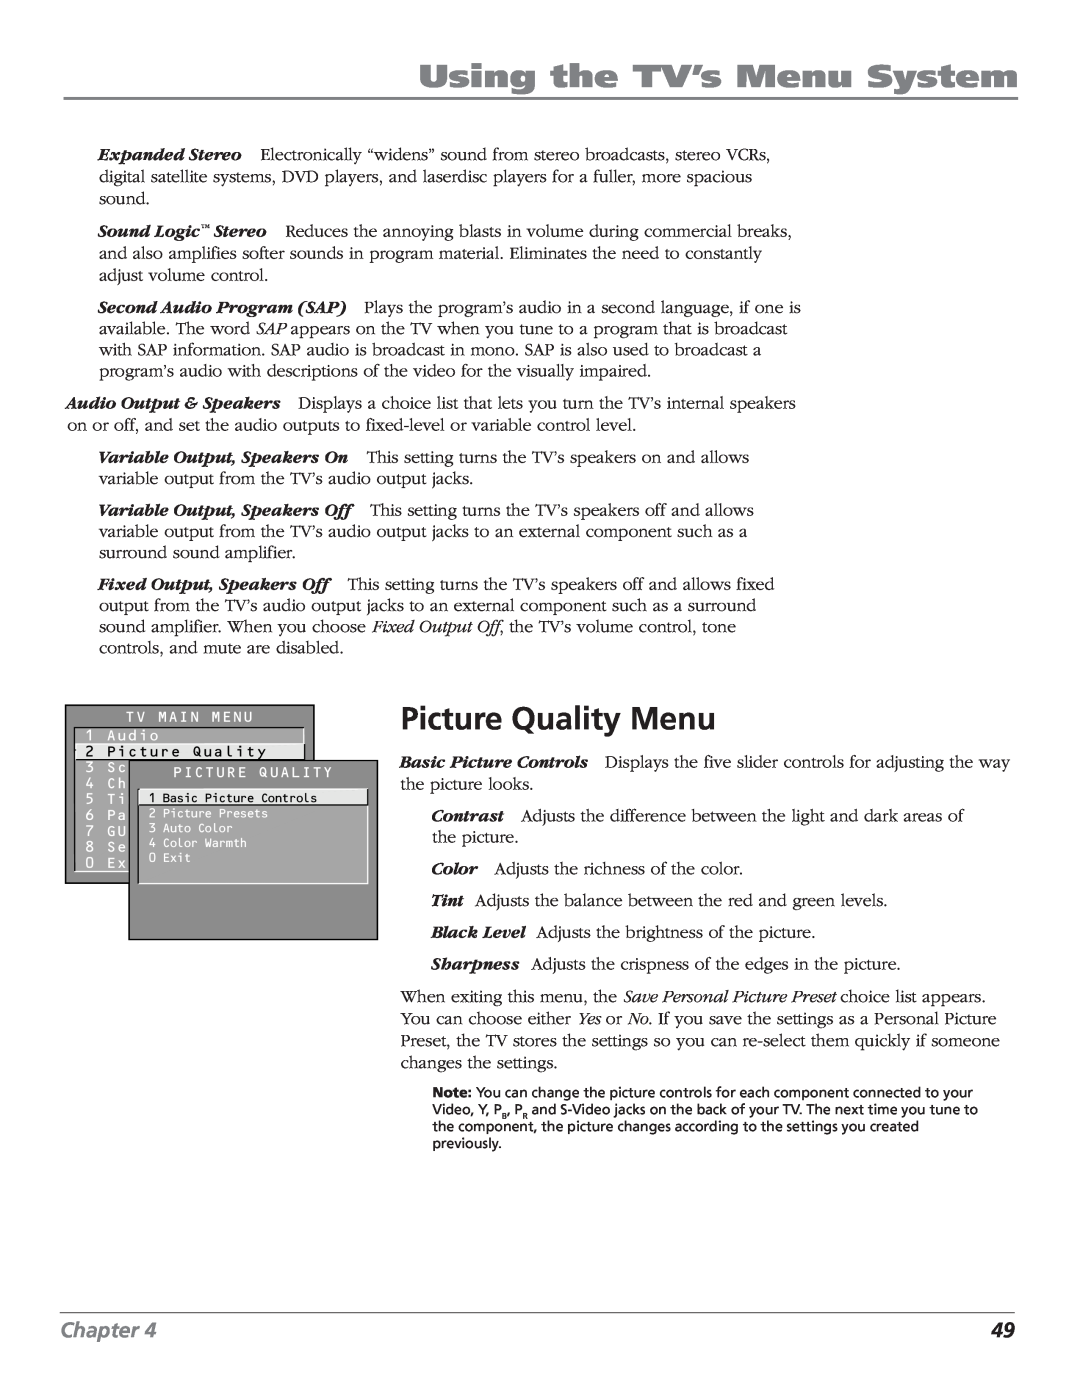 RCA MR68TF700 manual Picture Quality Menu, Using the TV’s Menu System, Chapter 